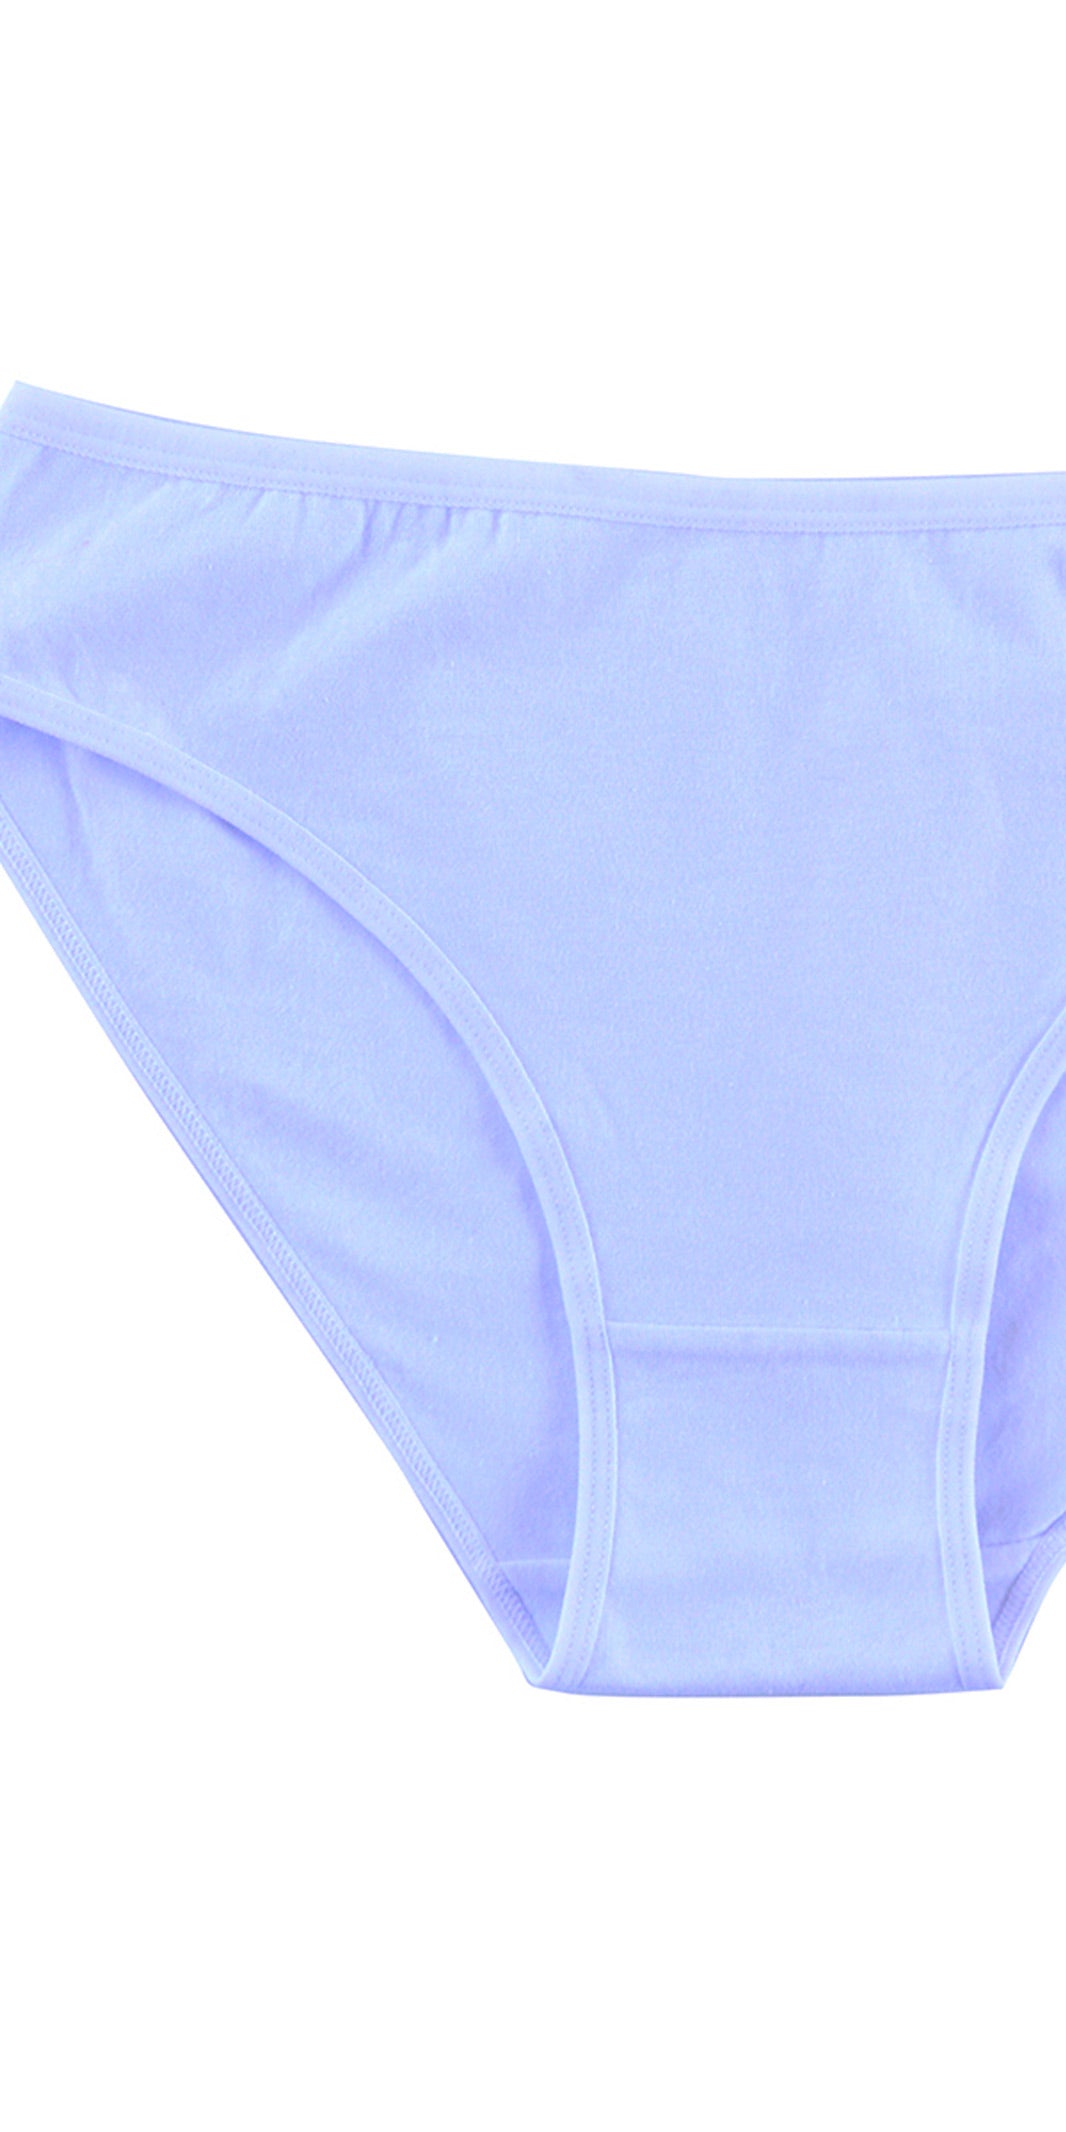 Mid-waist Simple And Elegant Pure Cotton Triangle Panties.